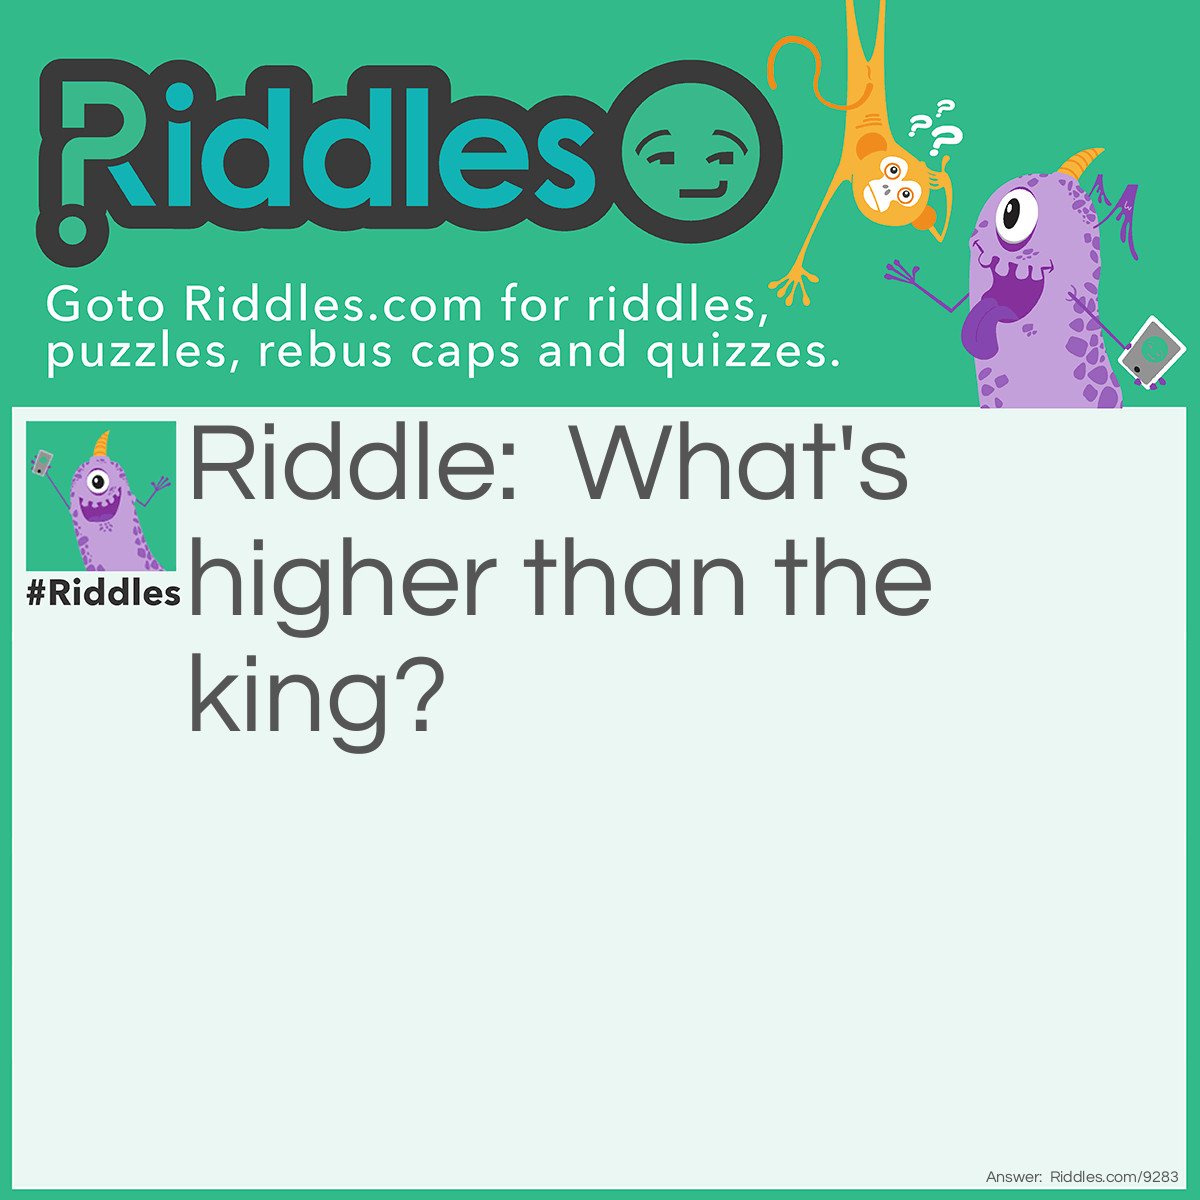 Riddle: What's higher than the king? Answer: His crown.